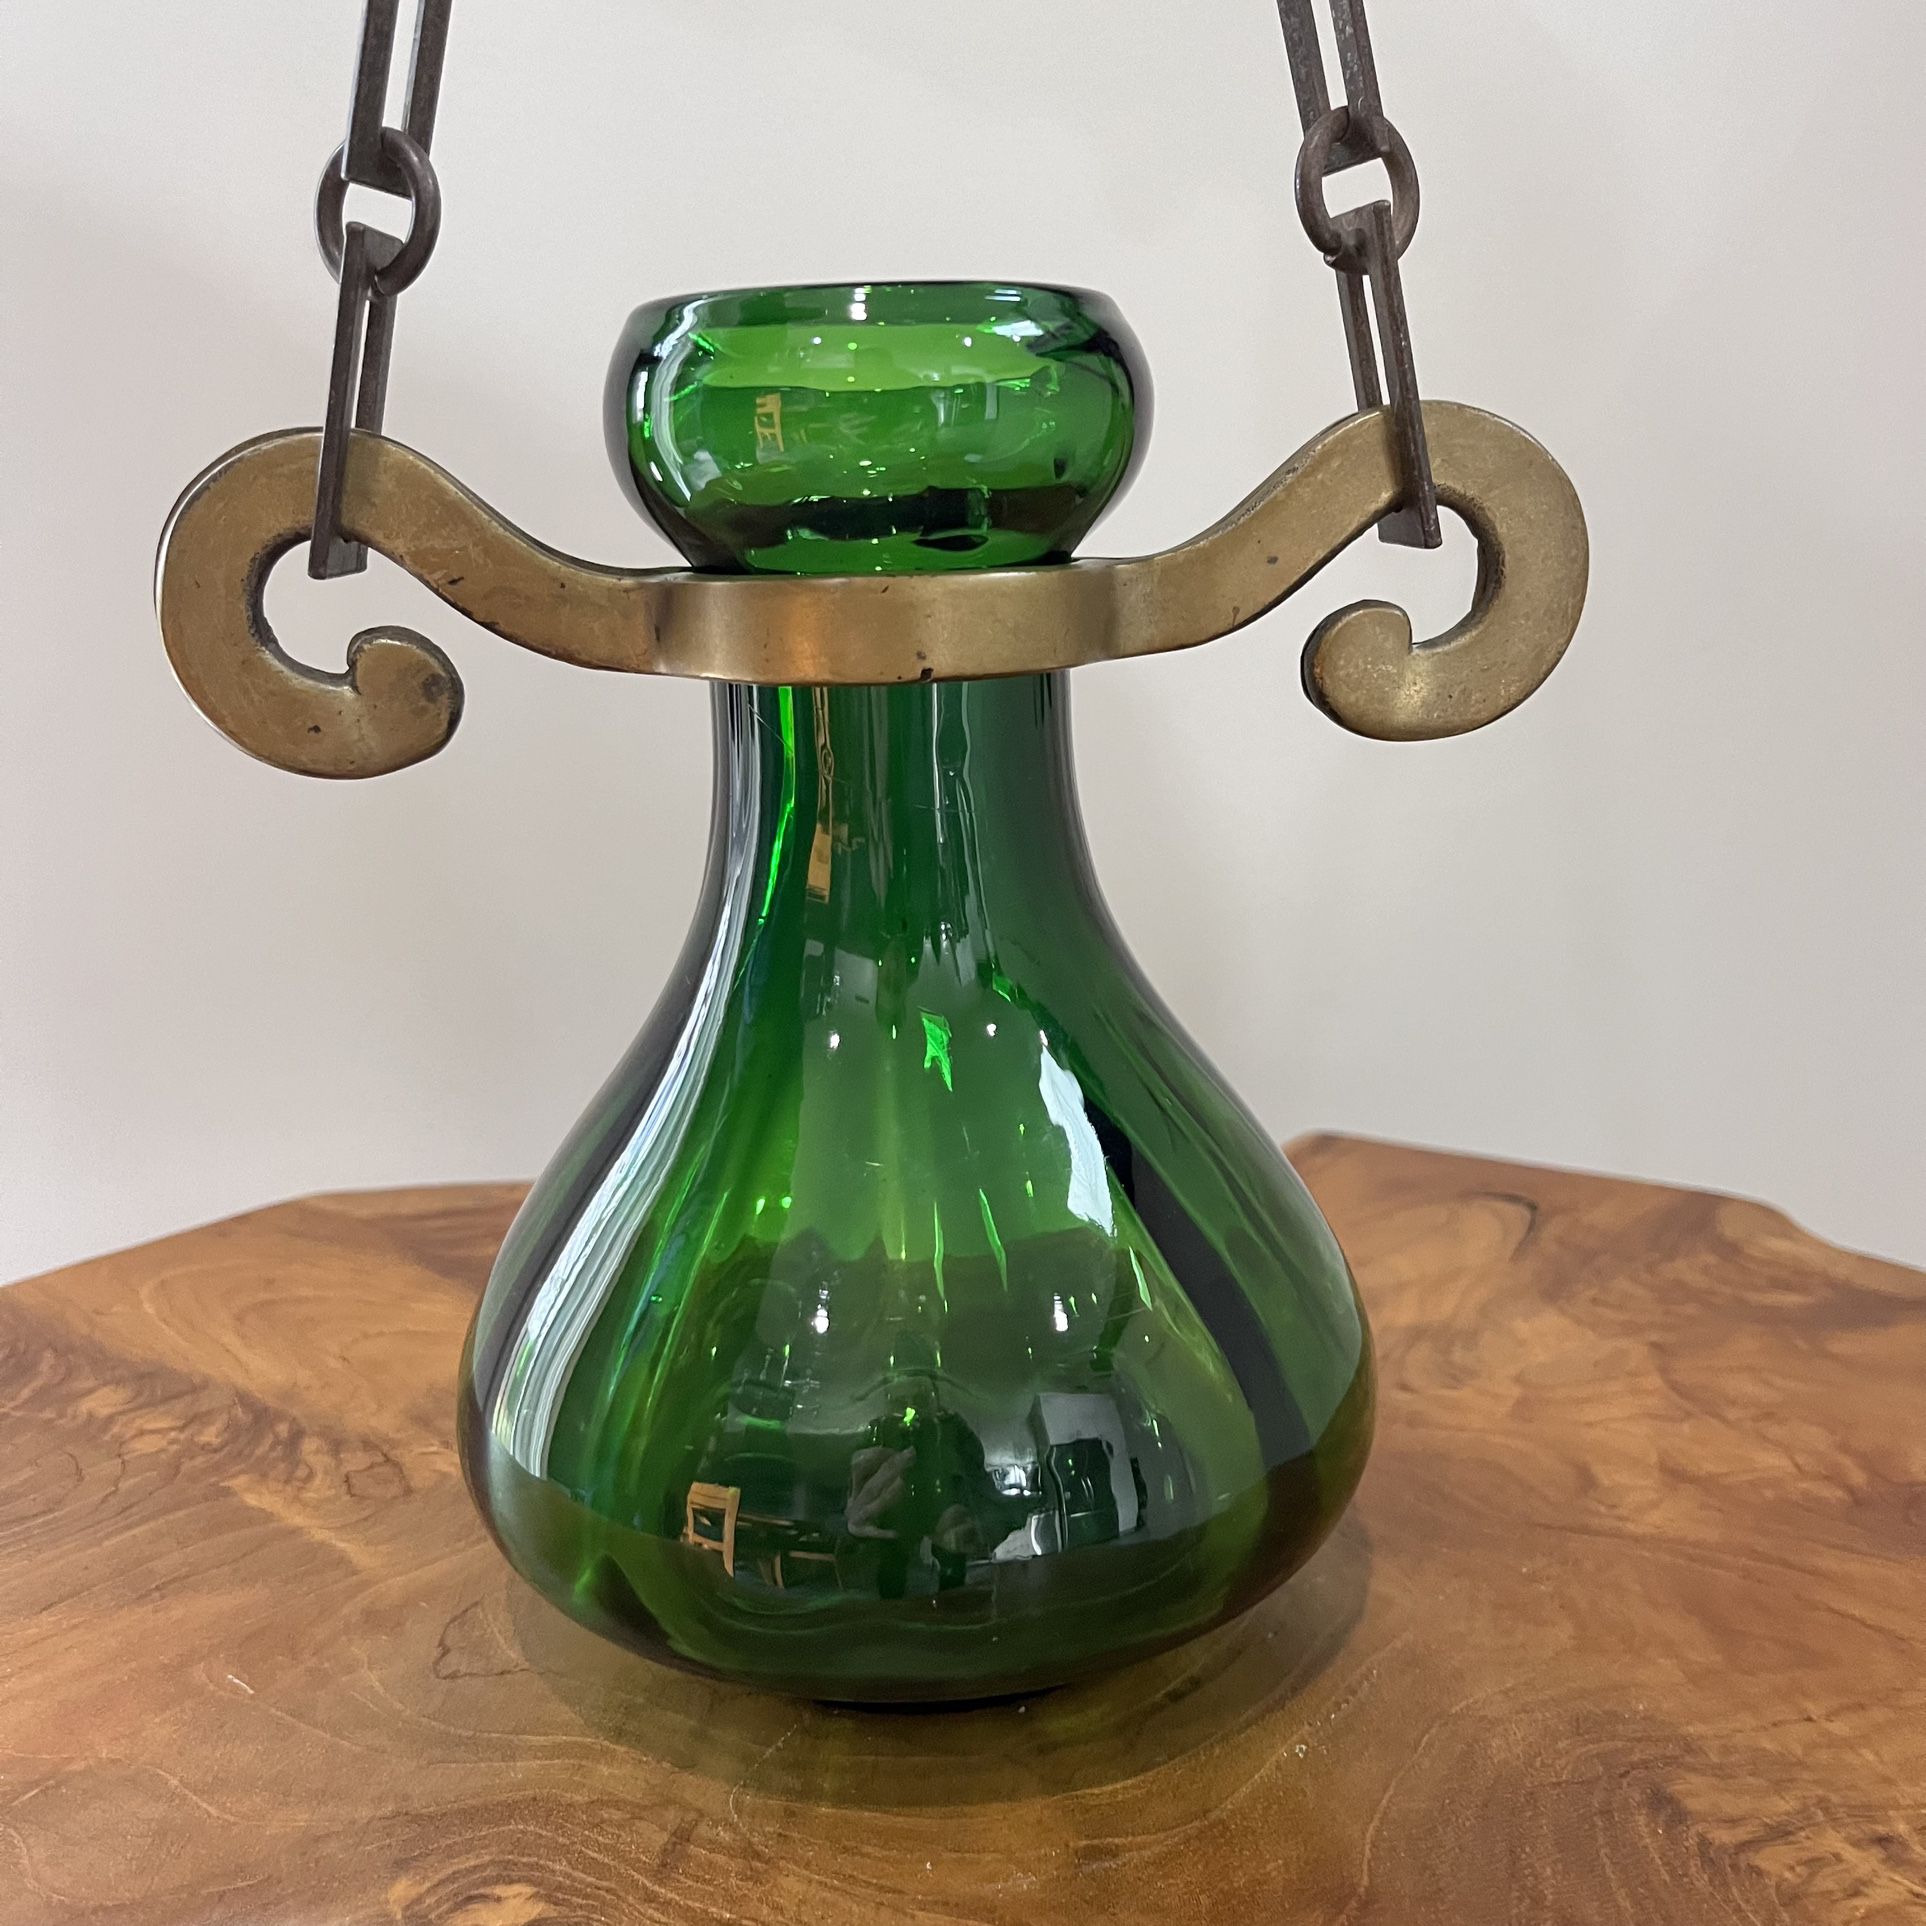 Hanging Plant Flowers Art Glass Emerald Green Hyacinth Bulb Hanging Plant Flower Vase With Raw Brass Holder & Chain Patent # Use Inside And Out